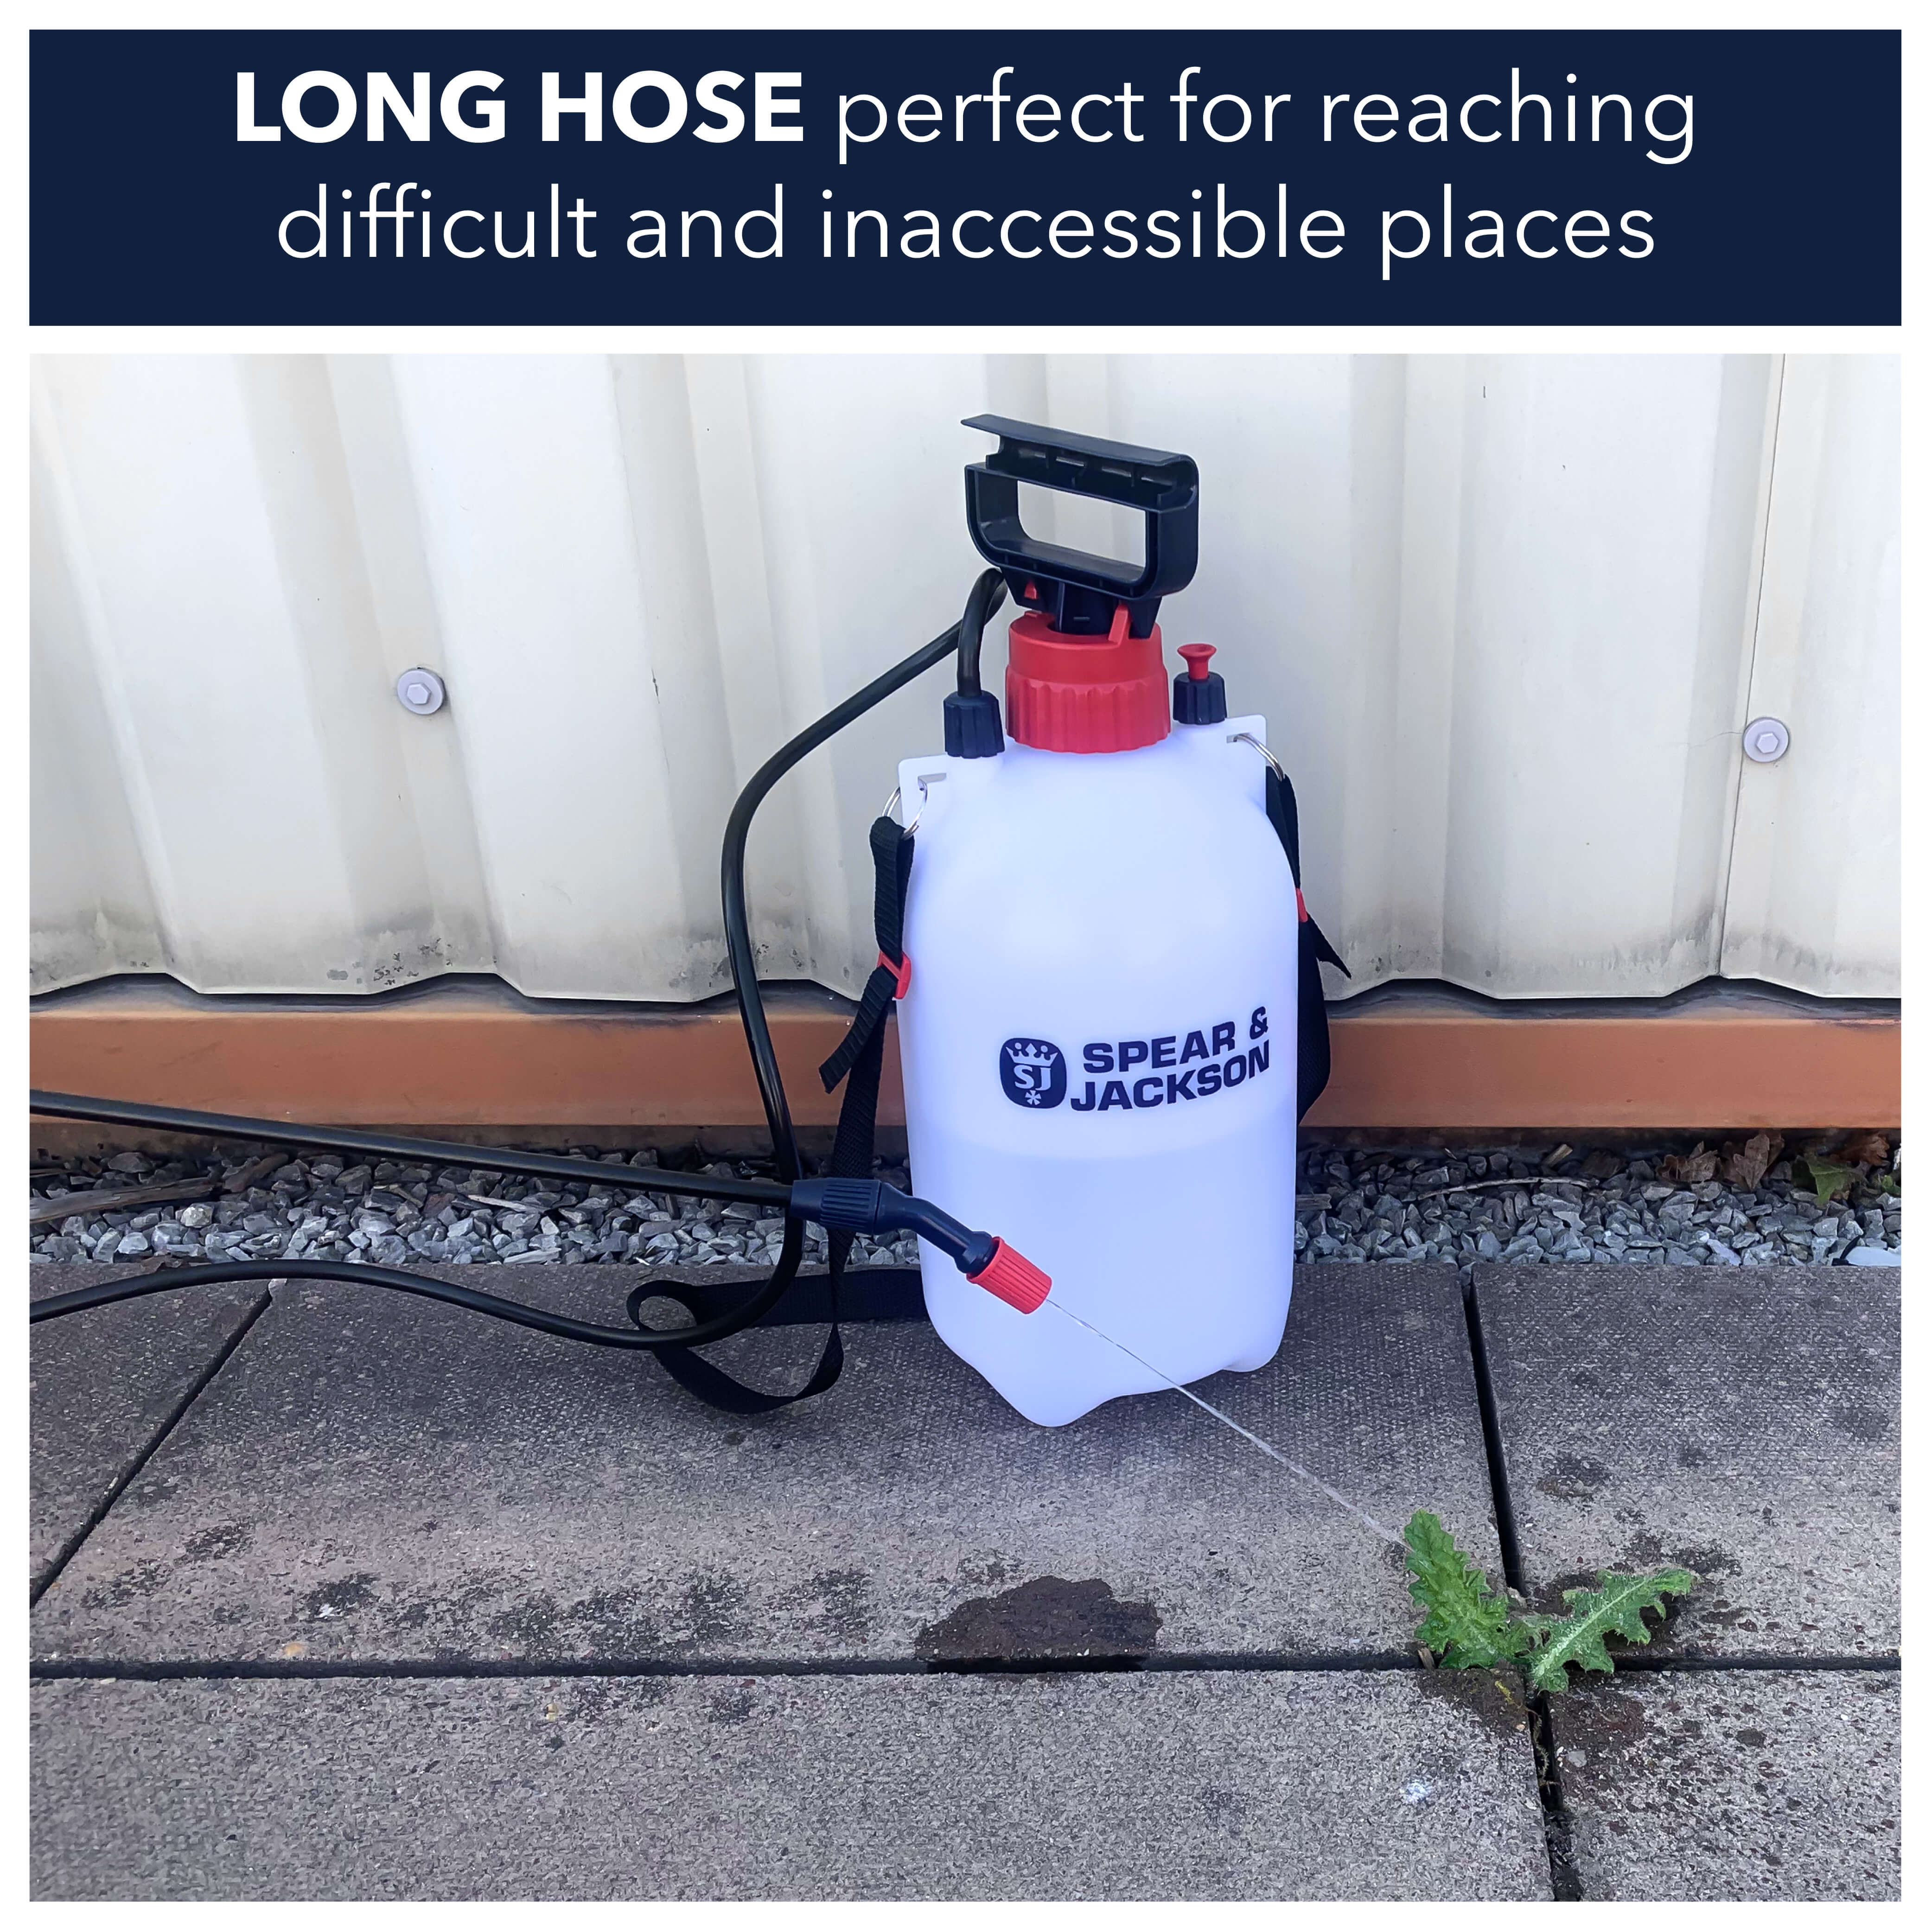 Long hose perfect for reaching difficult and inaccessible places